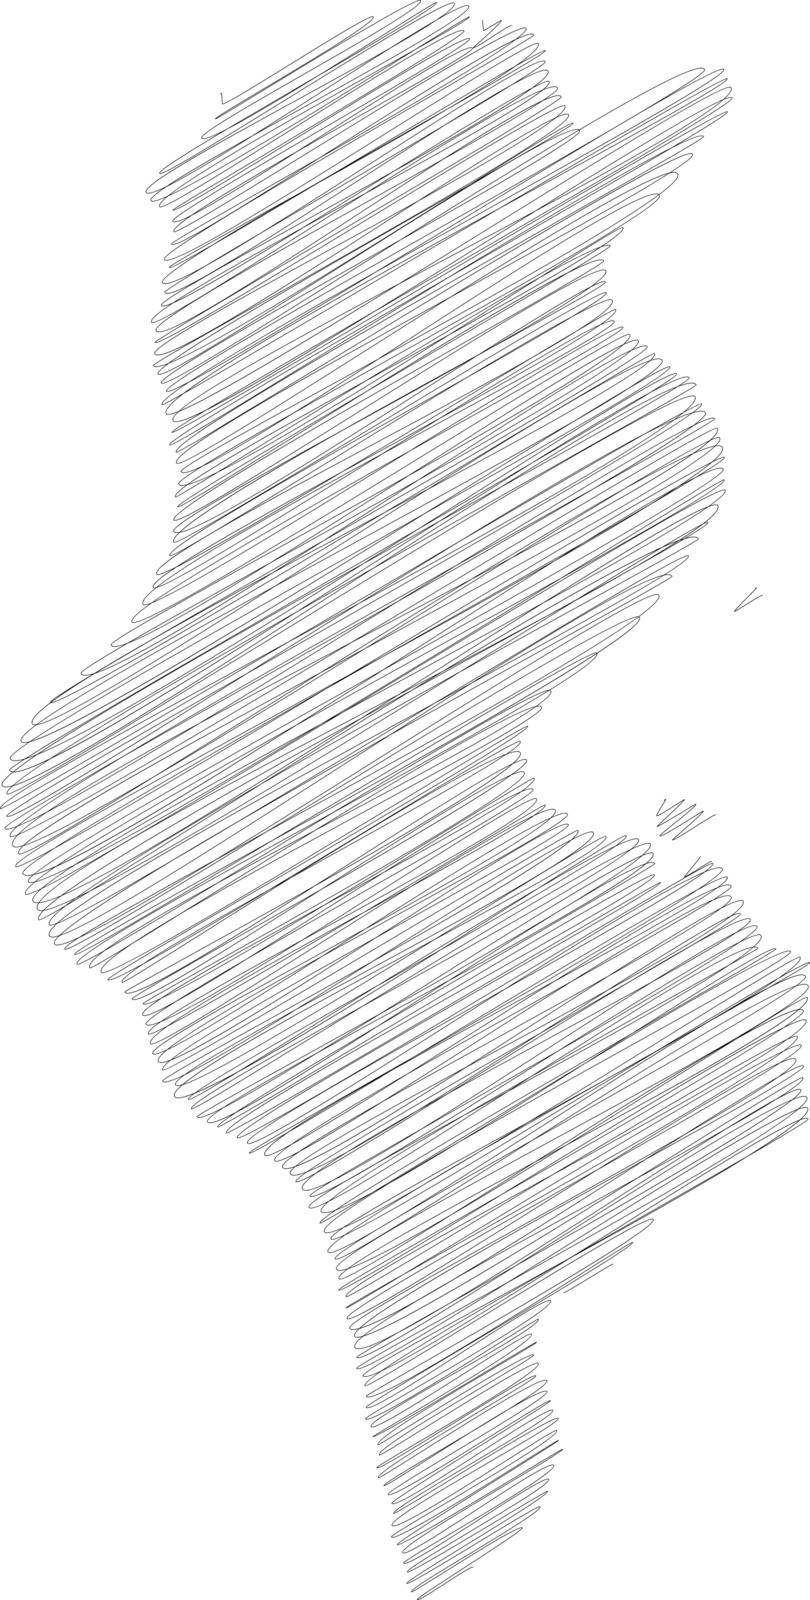 Tunisia - pencil scribble sketch silhouette map of country area with dropped shadow. Simple flat vector illustration.